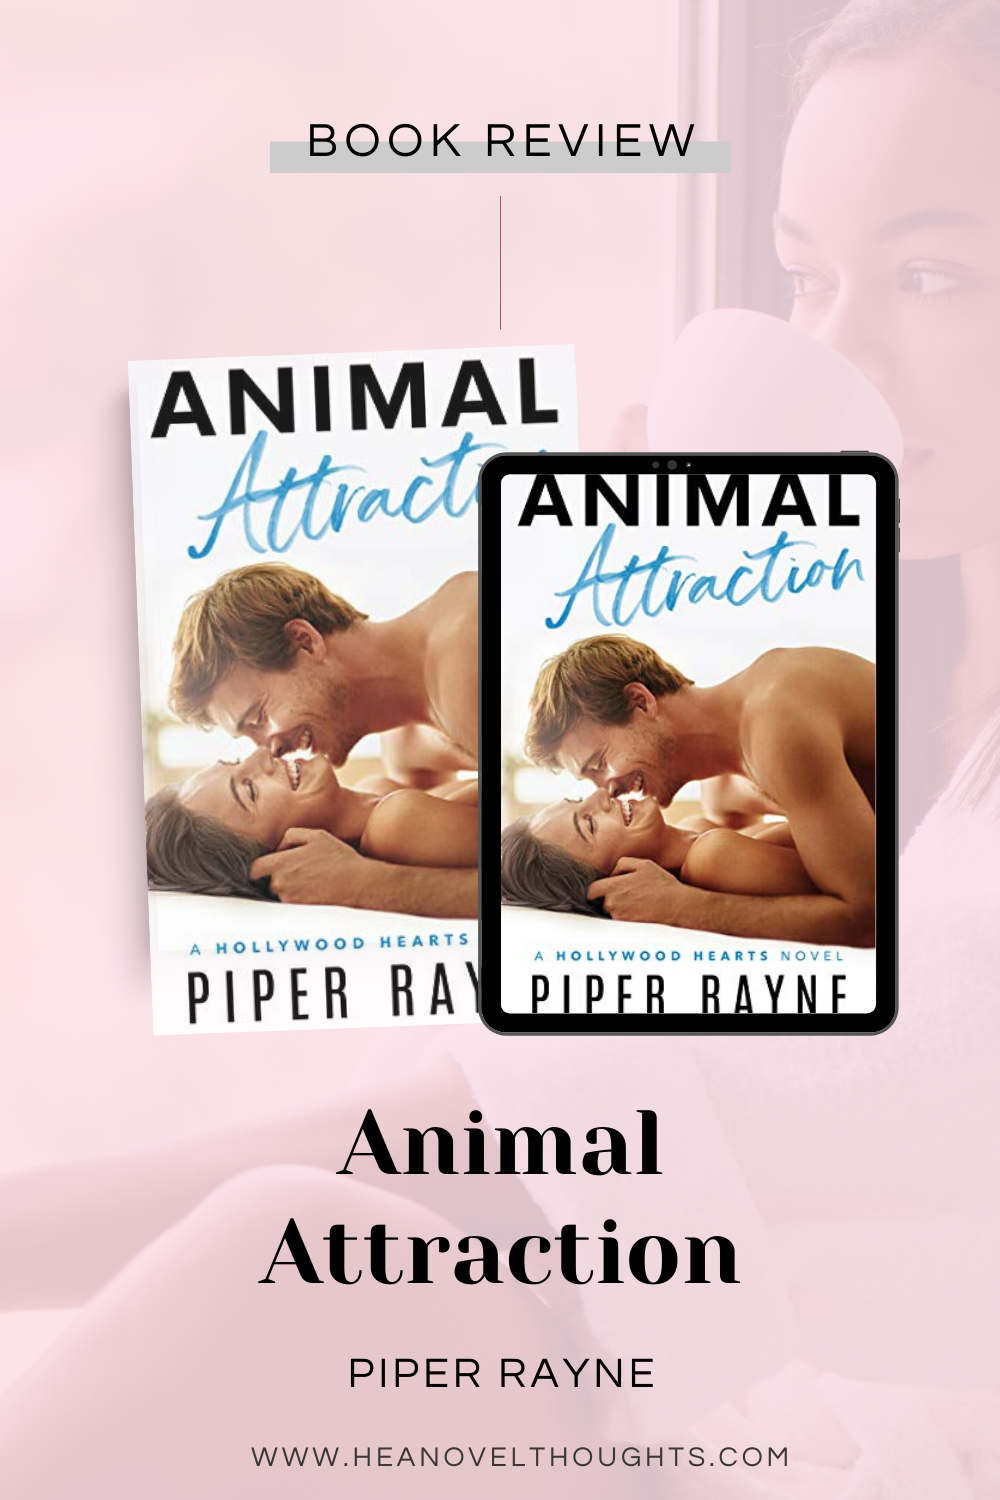 Animal Attraction by Piper Rayne